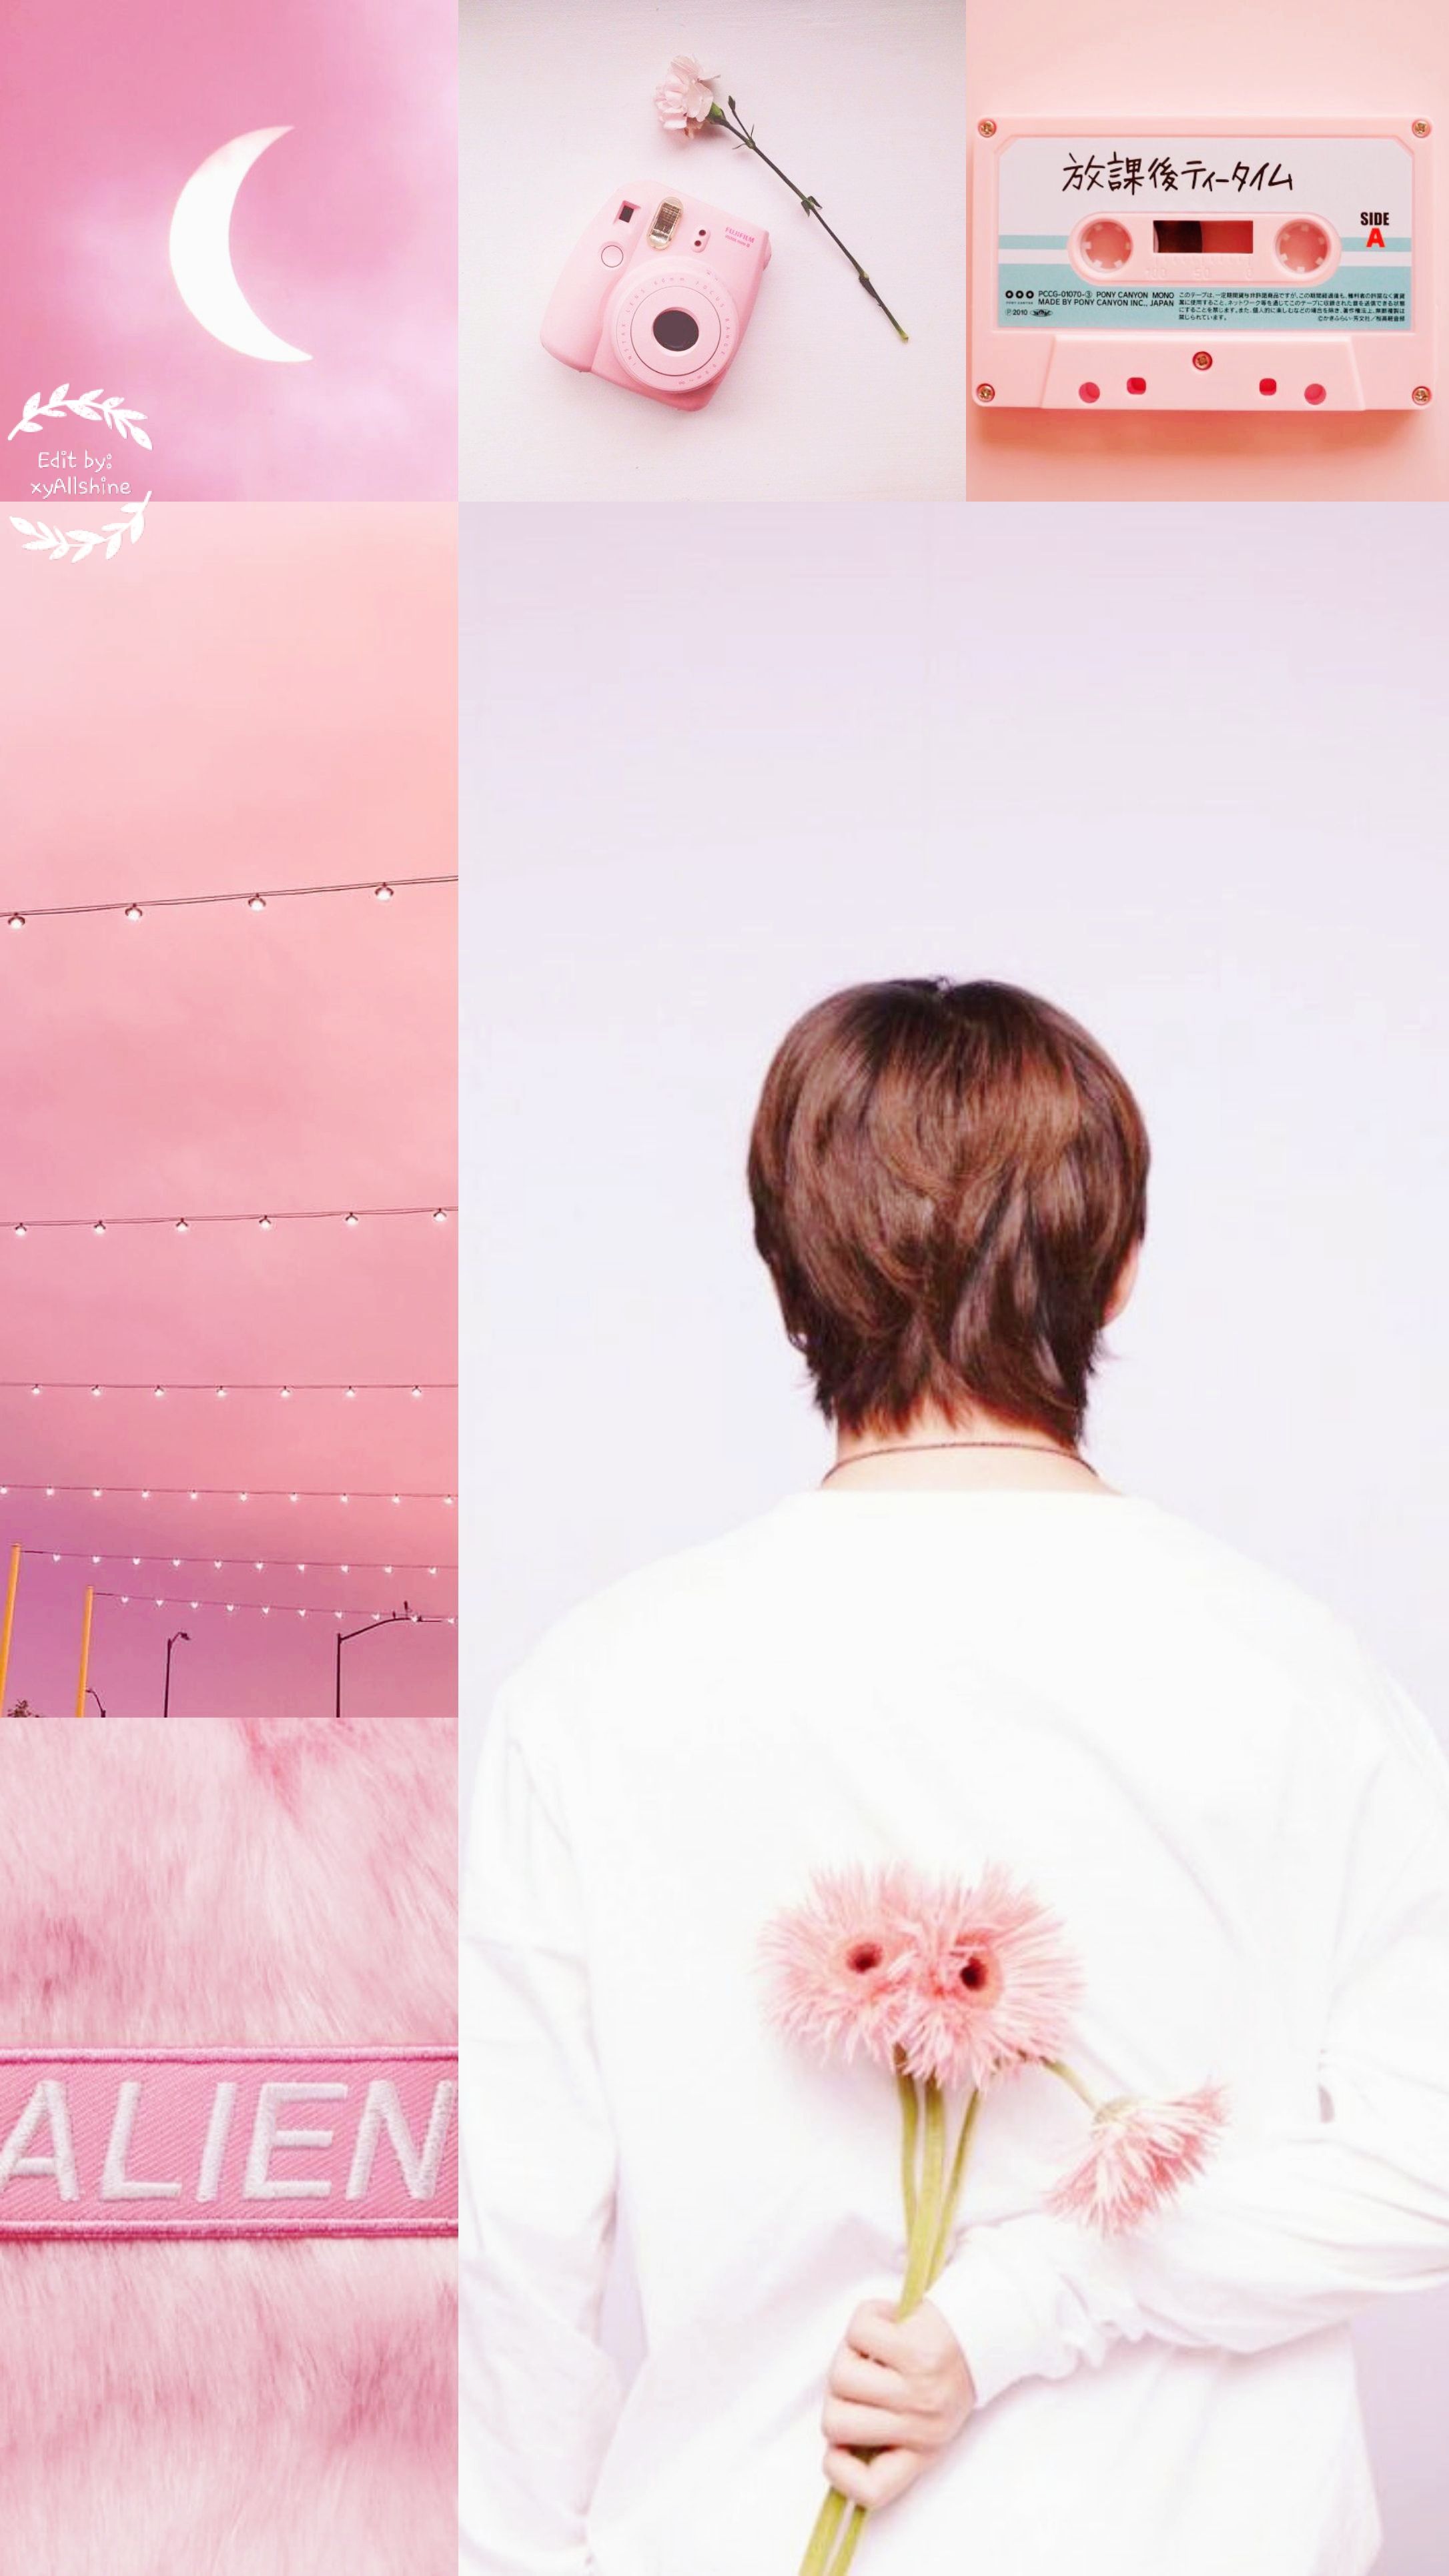 Free download BTS V Aesthetic Wallpaper With image [2172x3862] for your Desktop, Mobile & Tablet. Explore BTS V 2020 Aesthetic Wallpaper. BTS V Wallpaper, Carleton V Wallpaper, Aesthetic Wallpaper